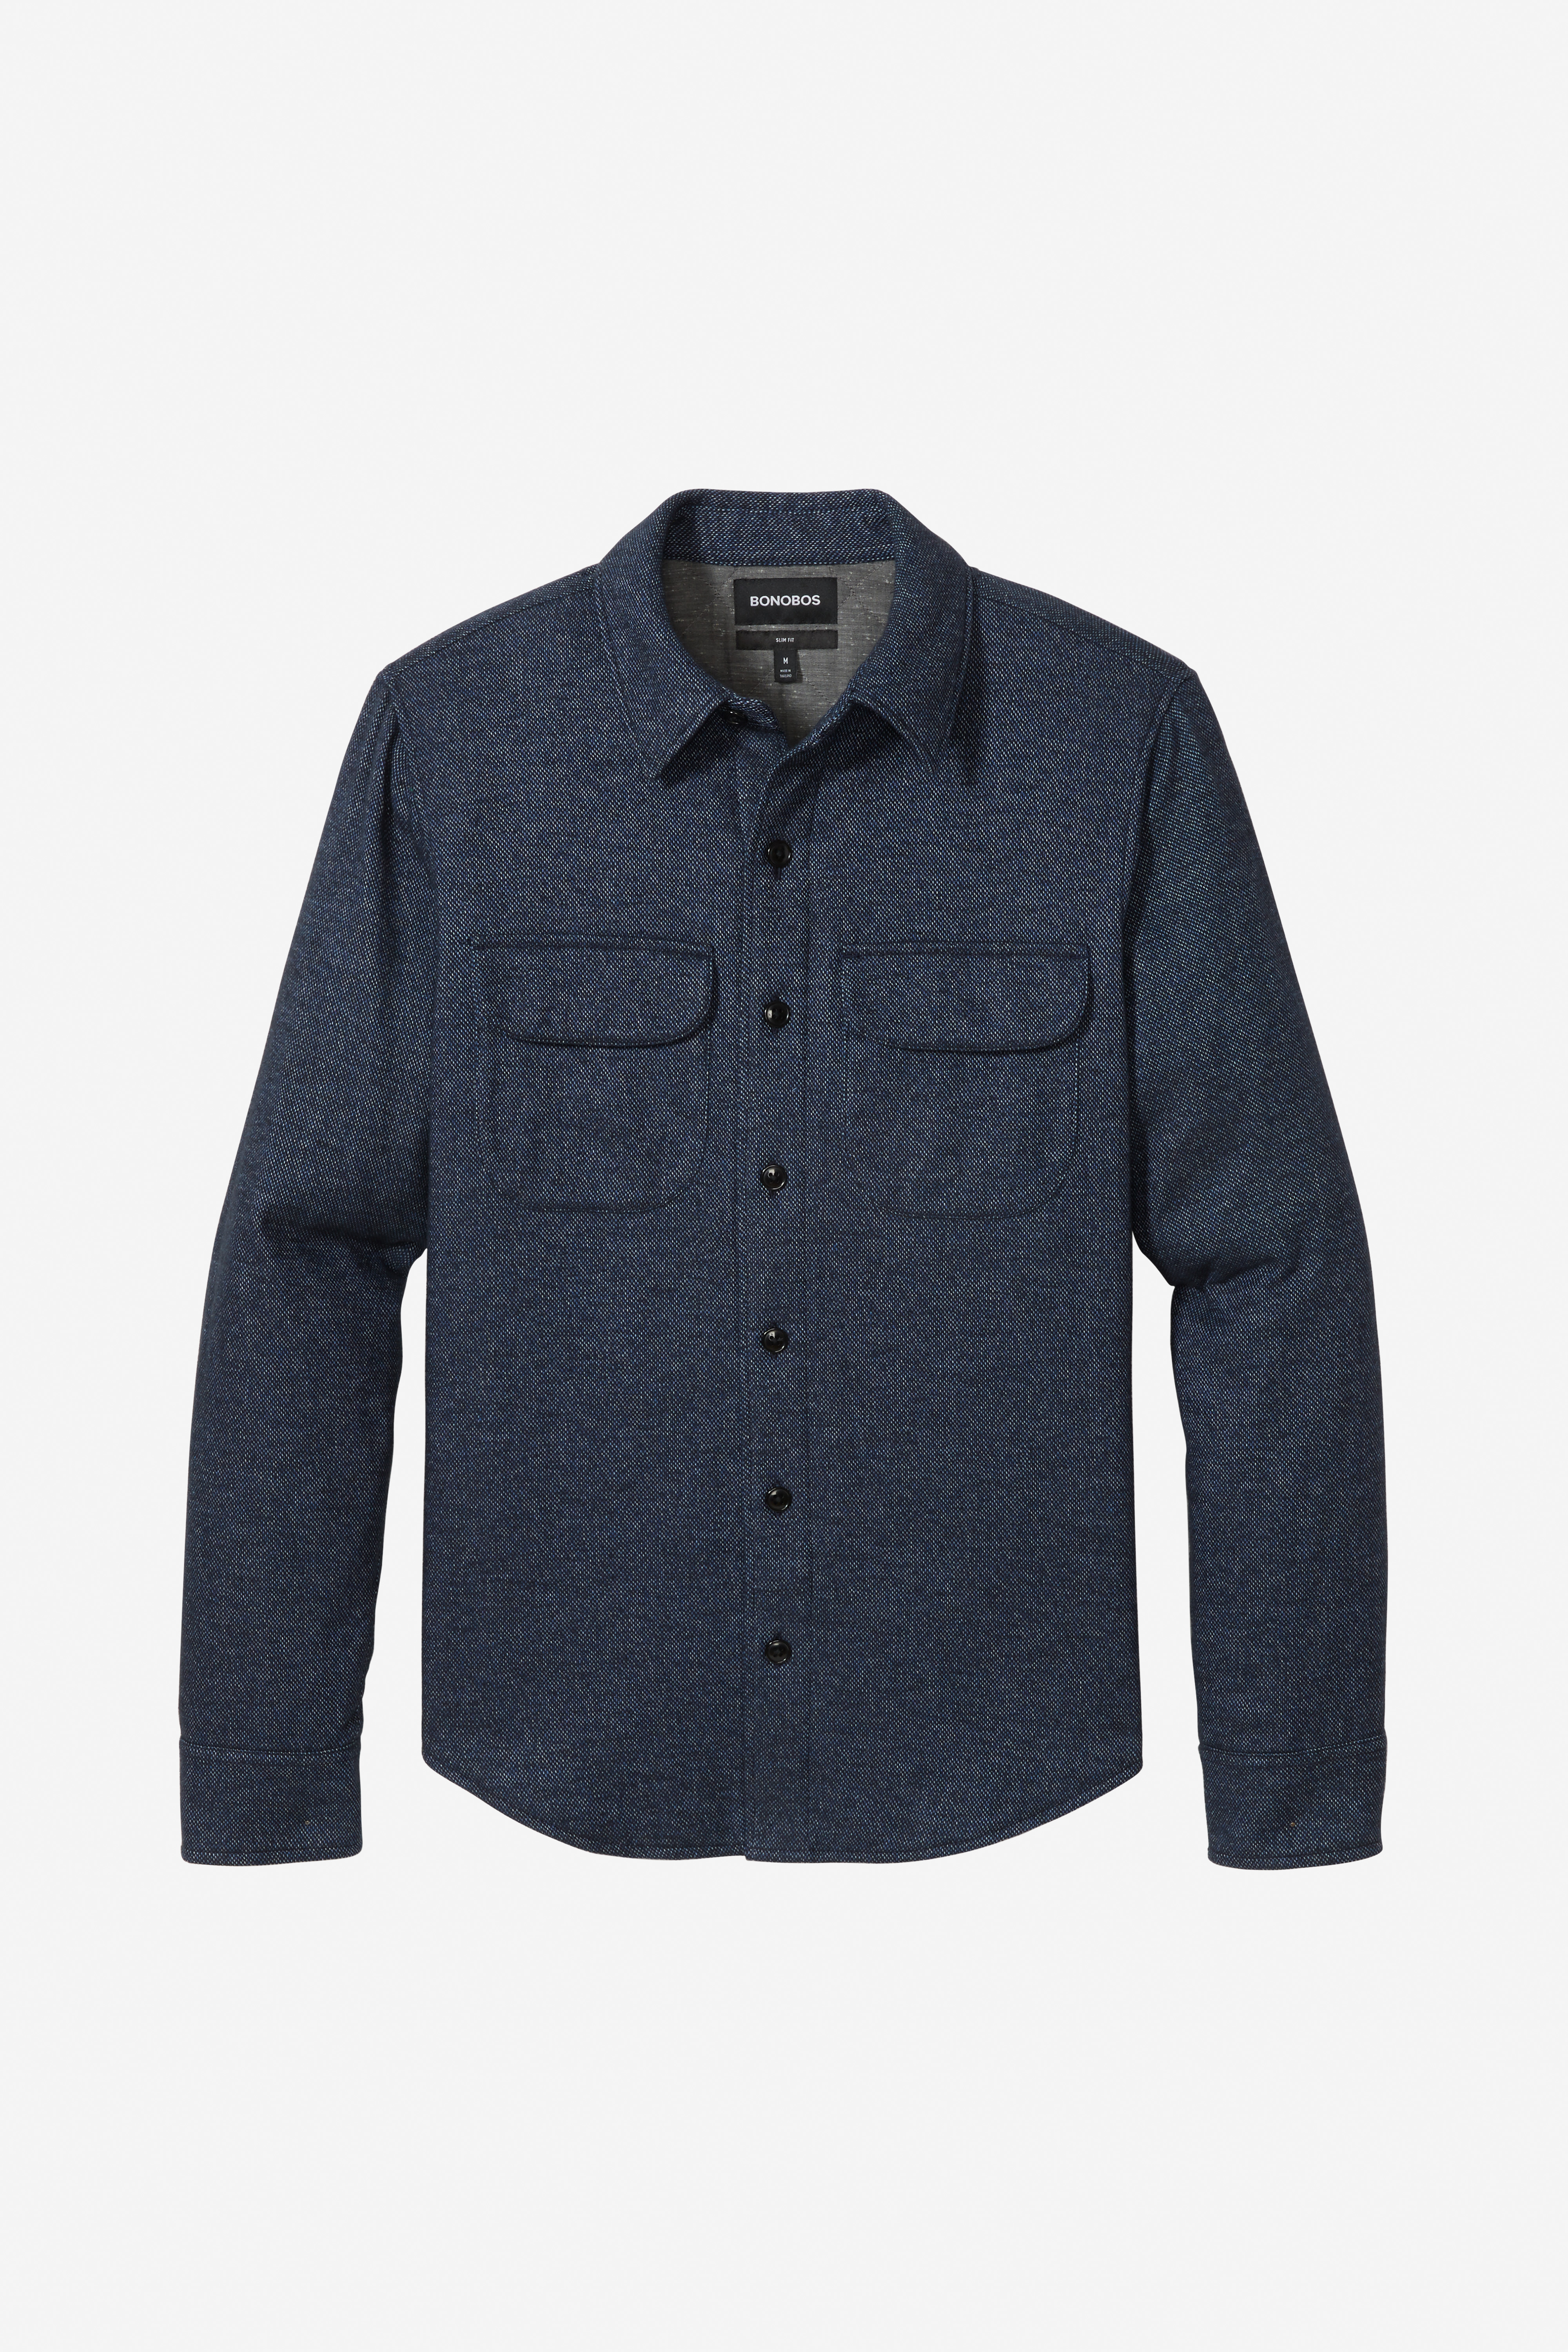 The Cotton Shirt Jacket Extended Sizes